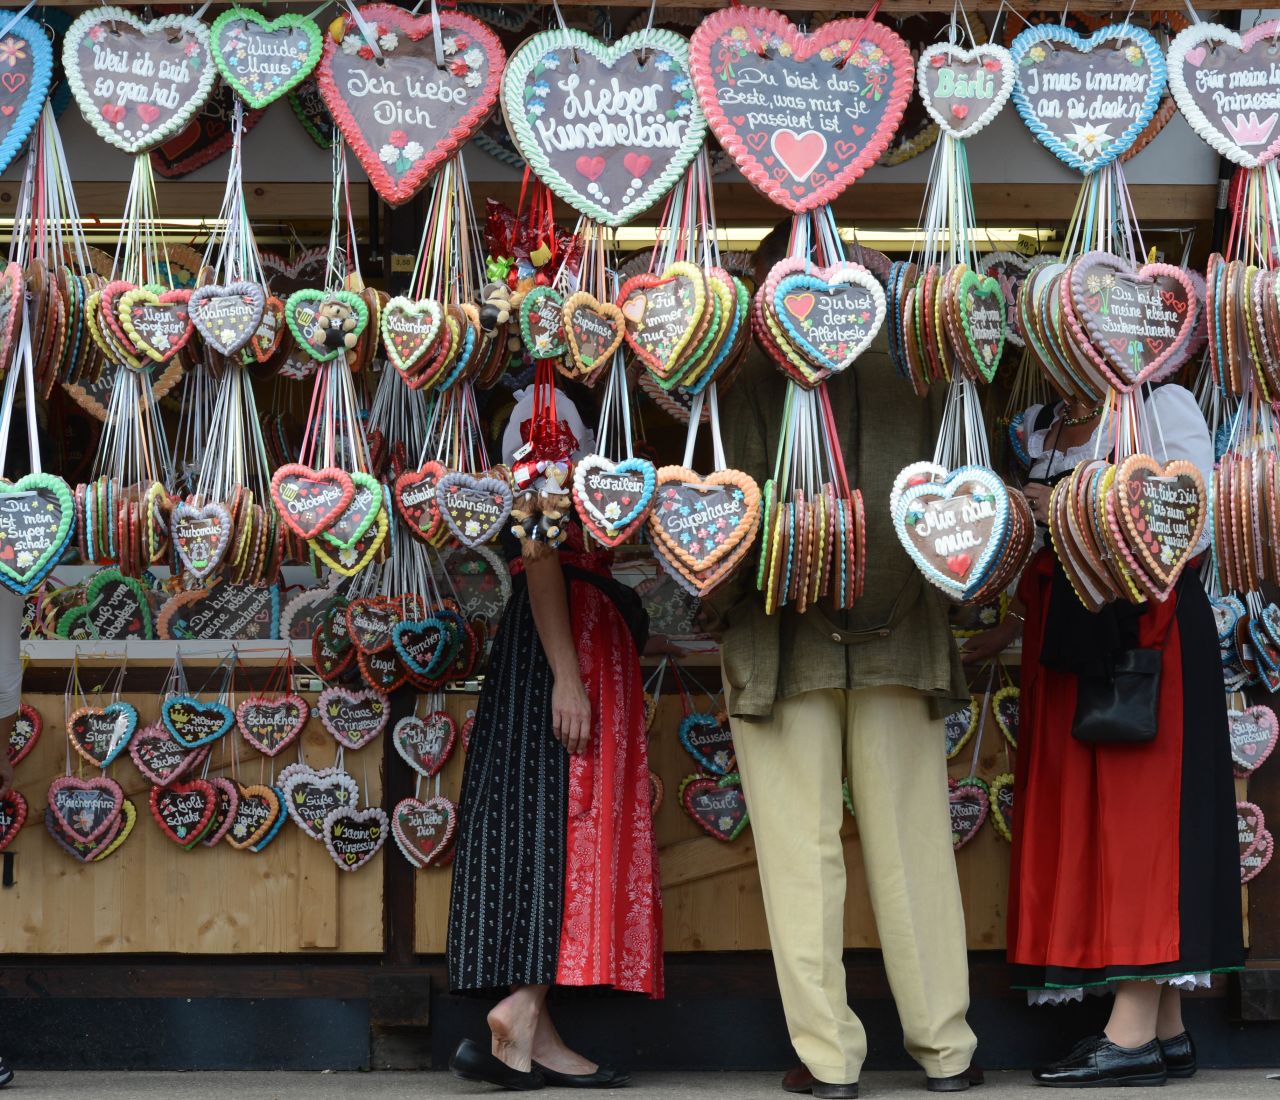 A booth sells gingerbread hearts at Oktoberfest on Tuesday.